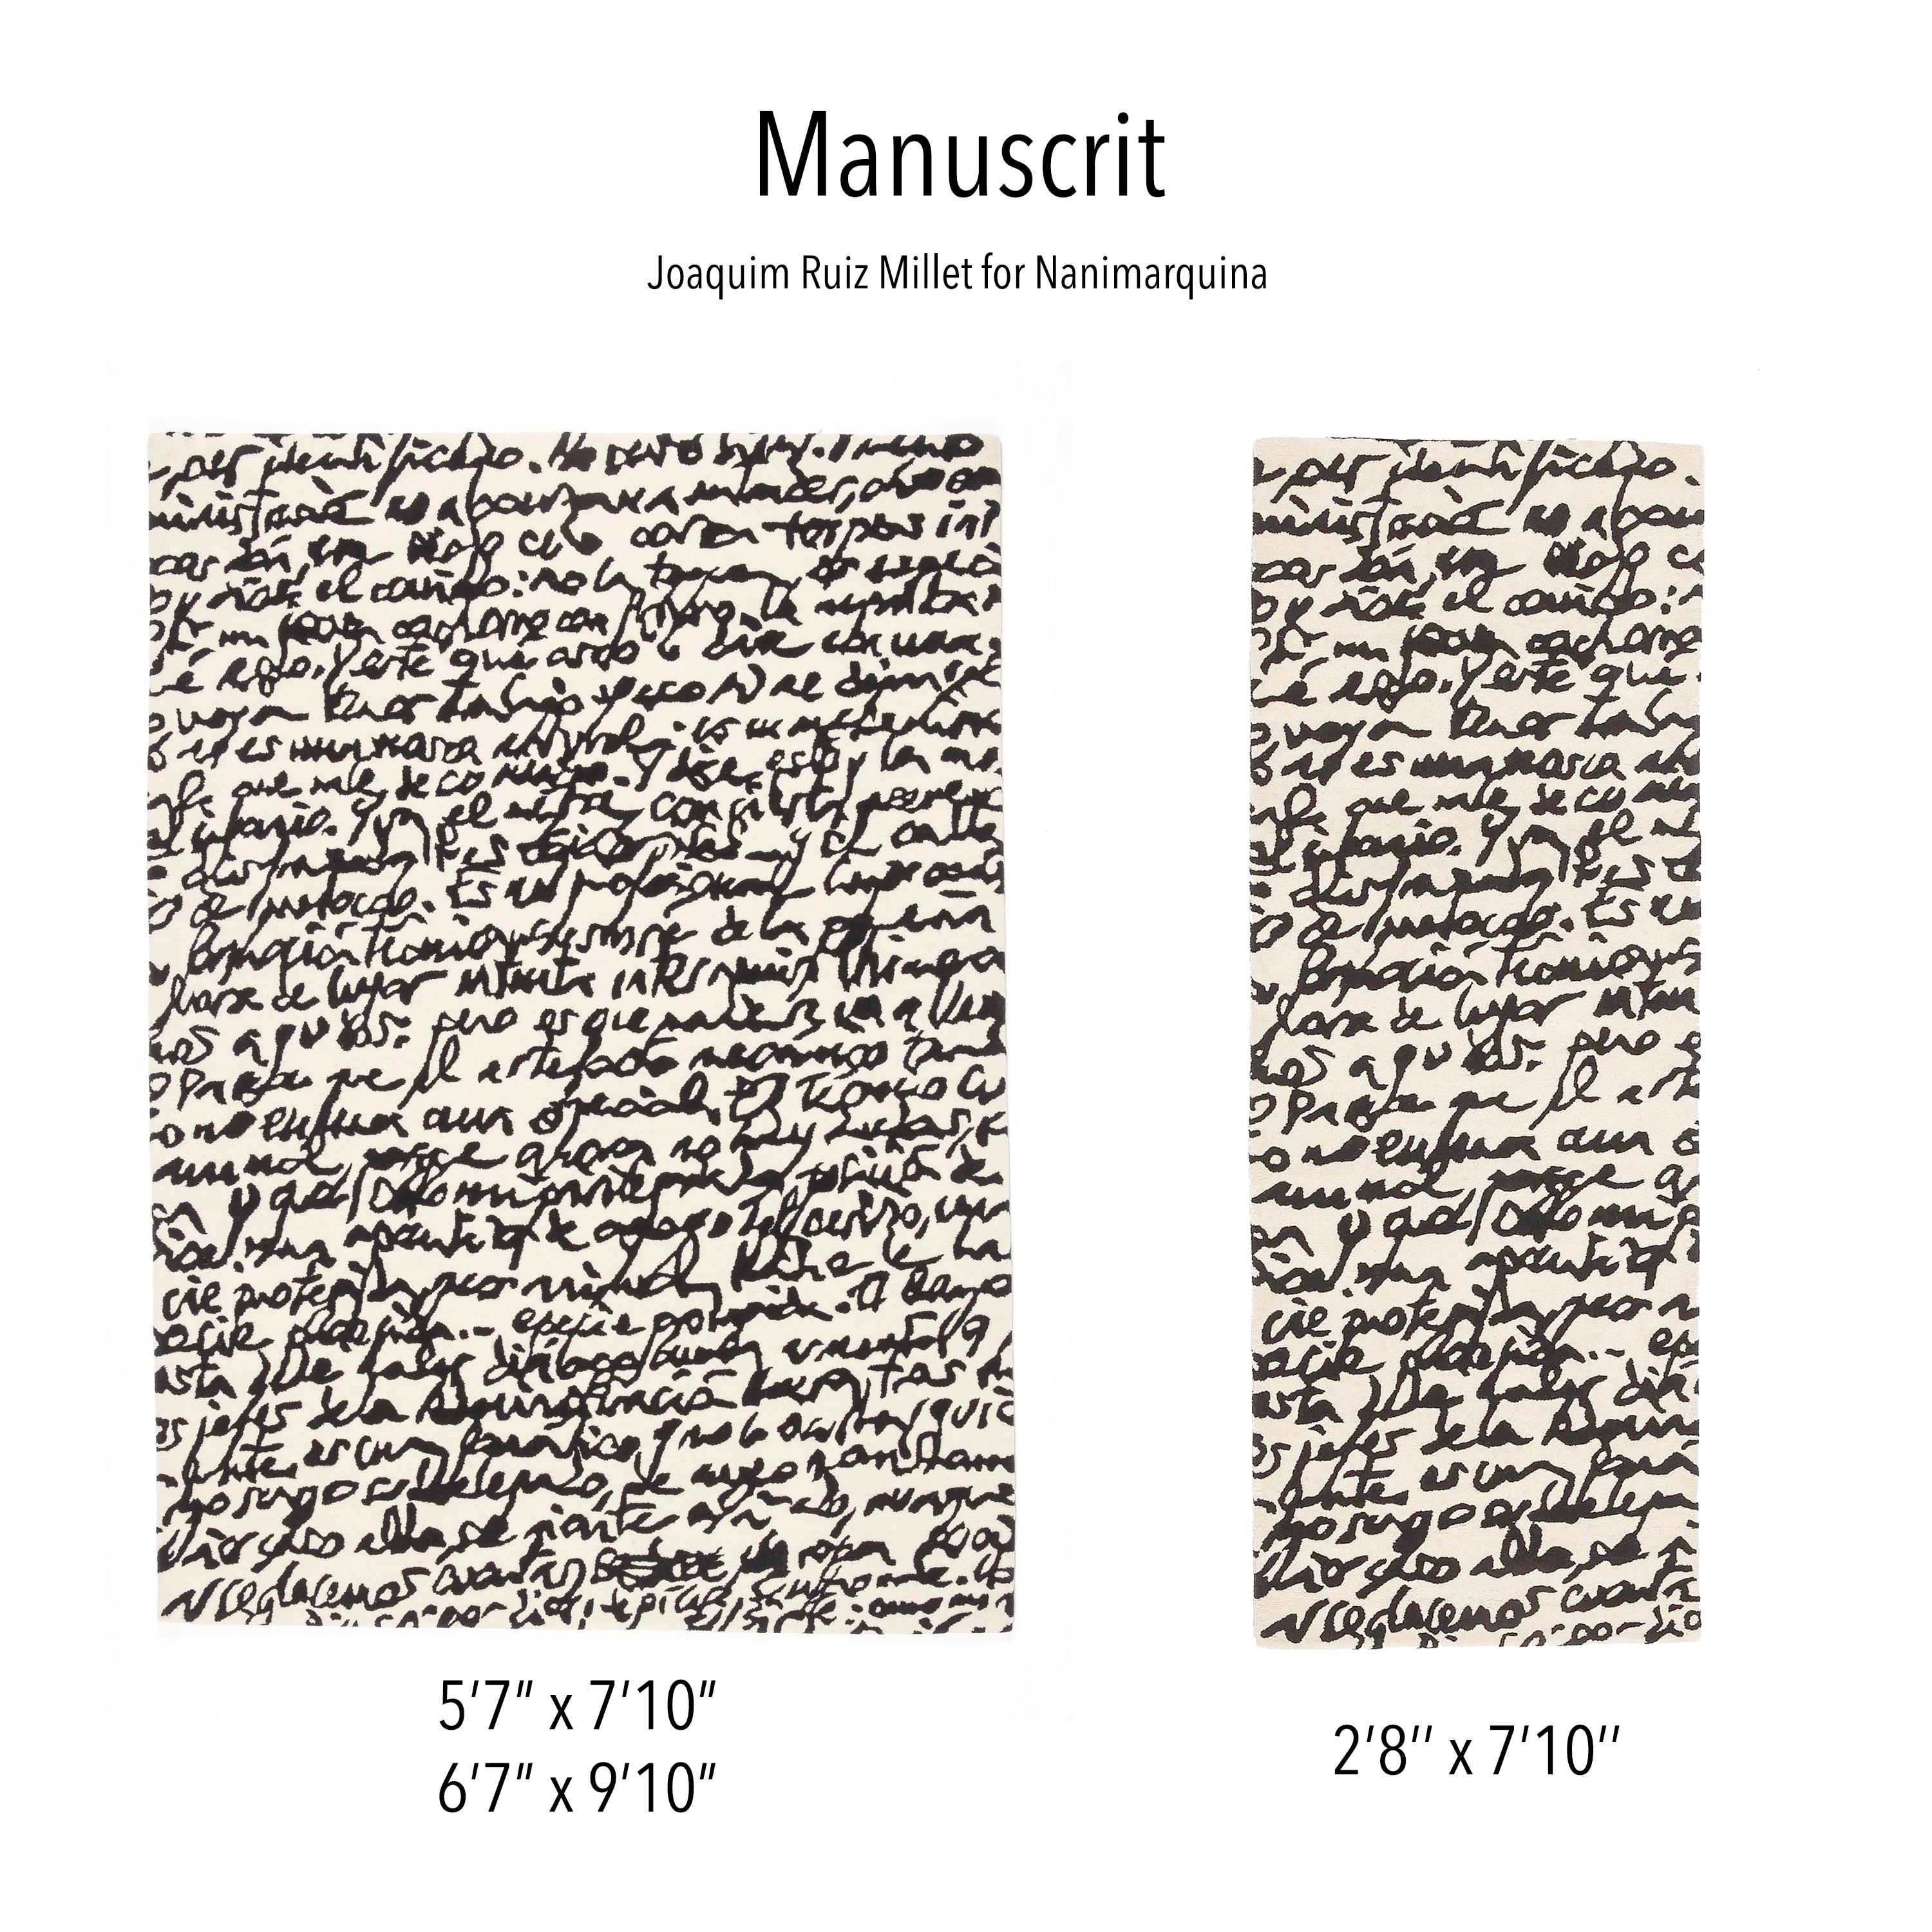 Wool Hand-Tufted 'Manuscrit' Rug by Joaquim Ruiz Millet for Nanimarquina  For Sale